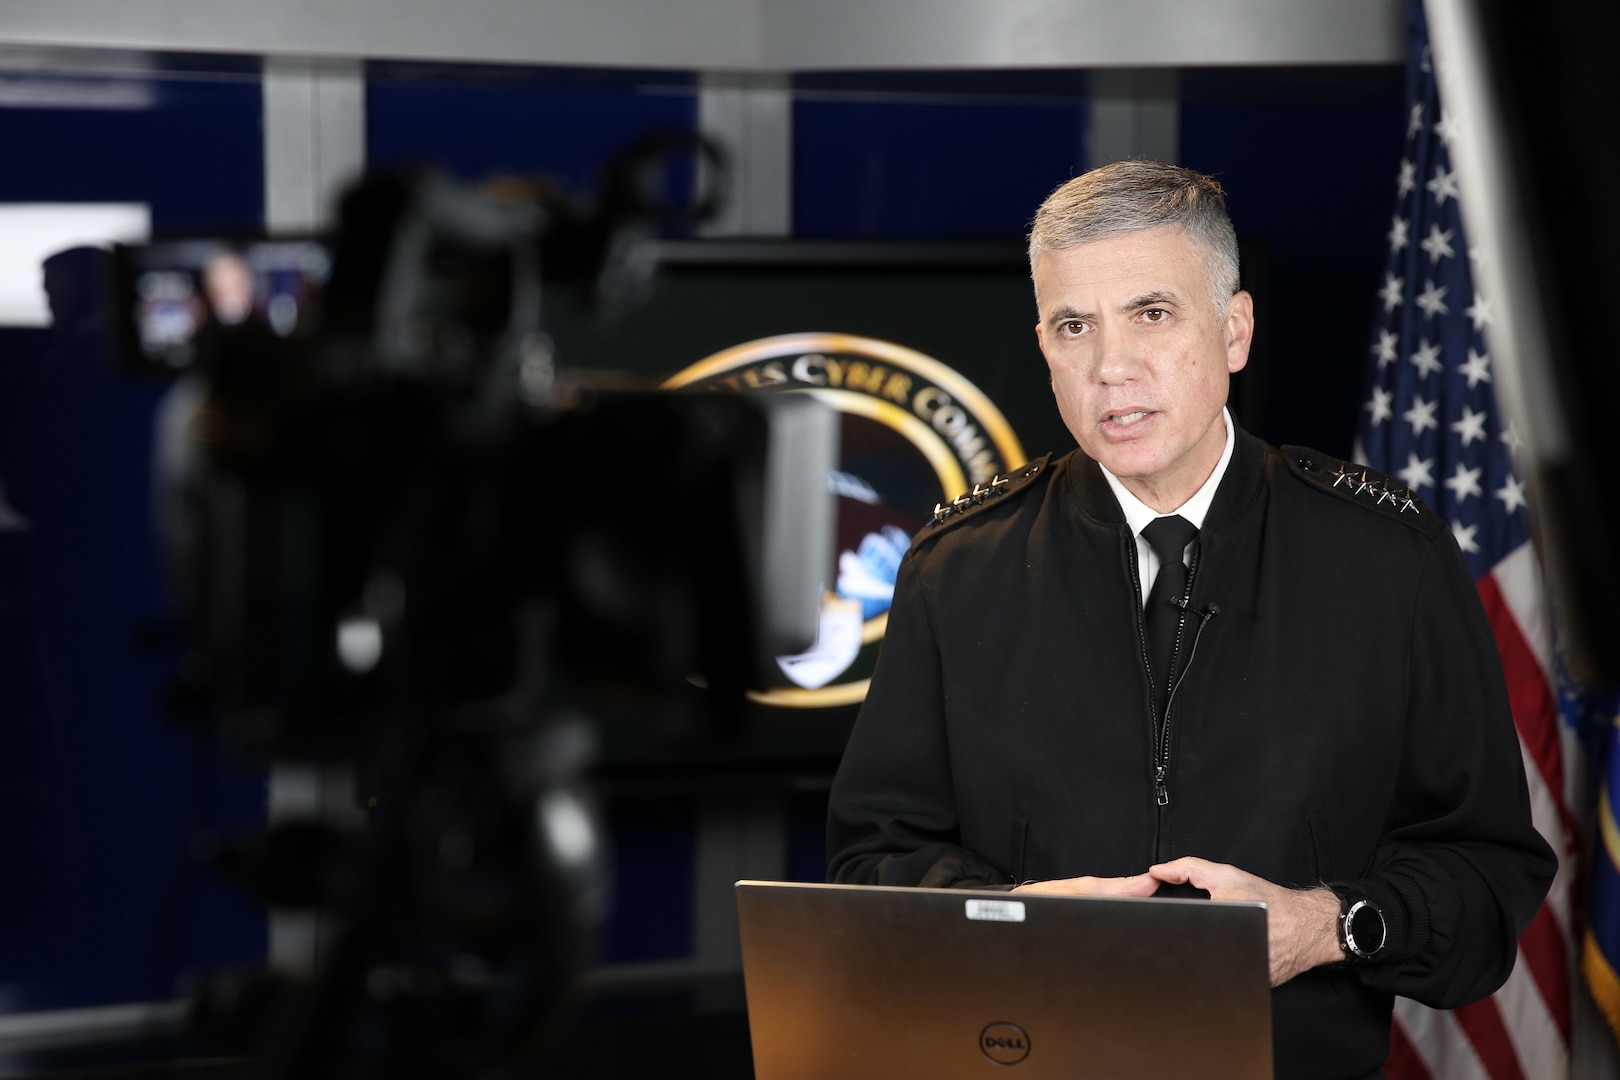 Army Gen. Paul M. Nakasone, U.S. Cyber Command commander and National Security Agency director, remarks on the complexities associated with working within cyberspace during the 2021 USCYBERCOM Legal Conference, March 3, 2021.